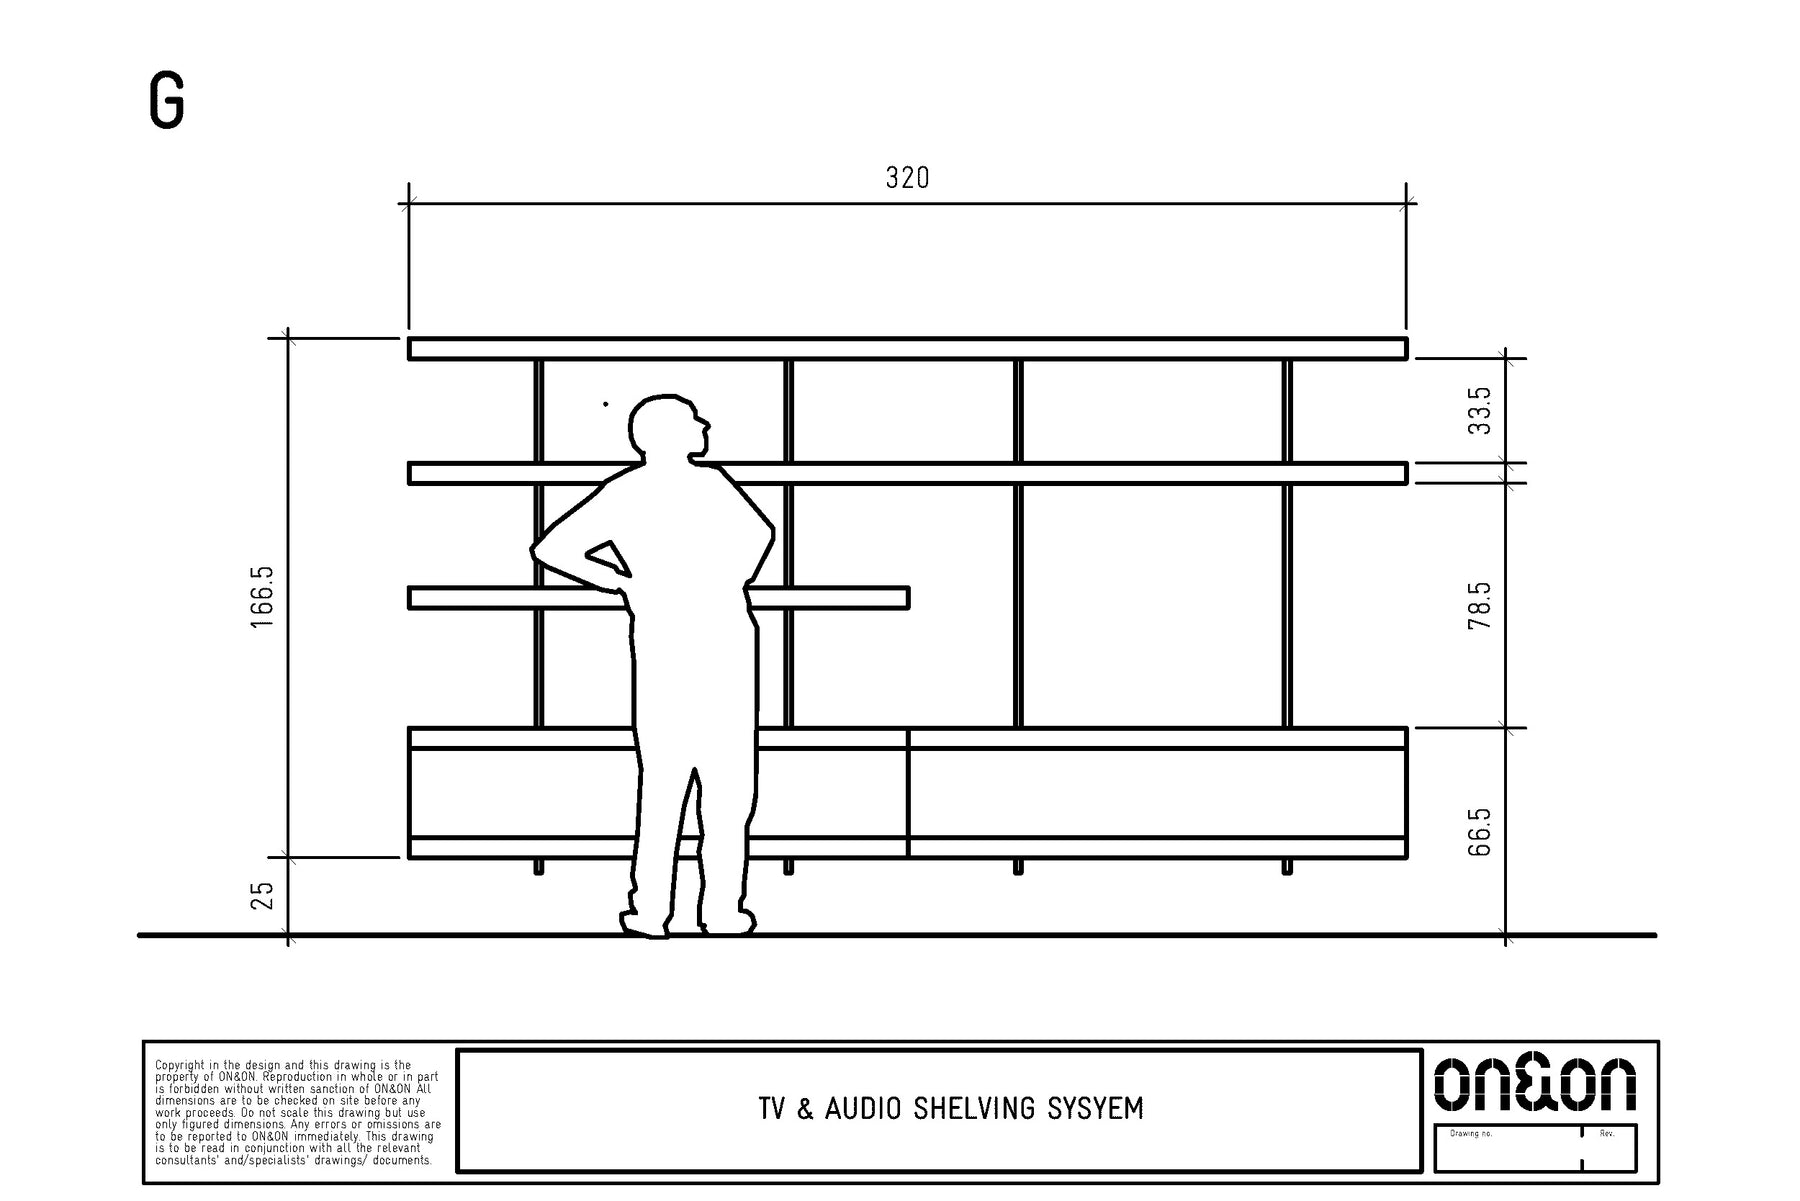 TV media wall G drawing with shelves and cabinets